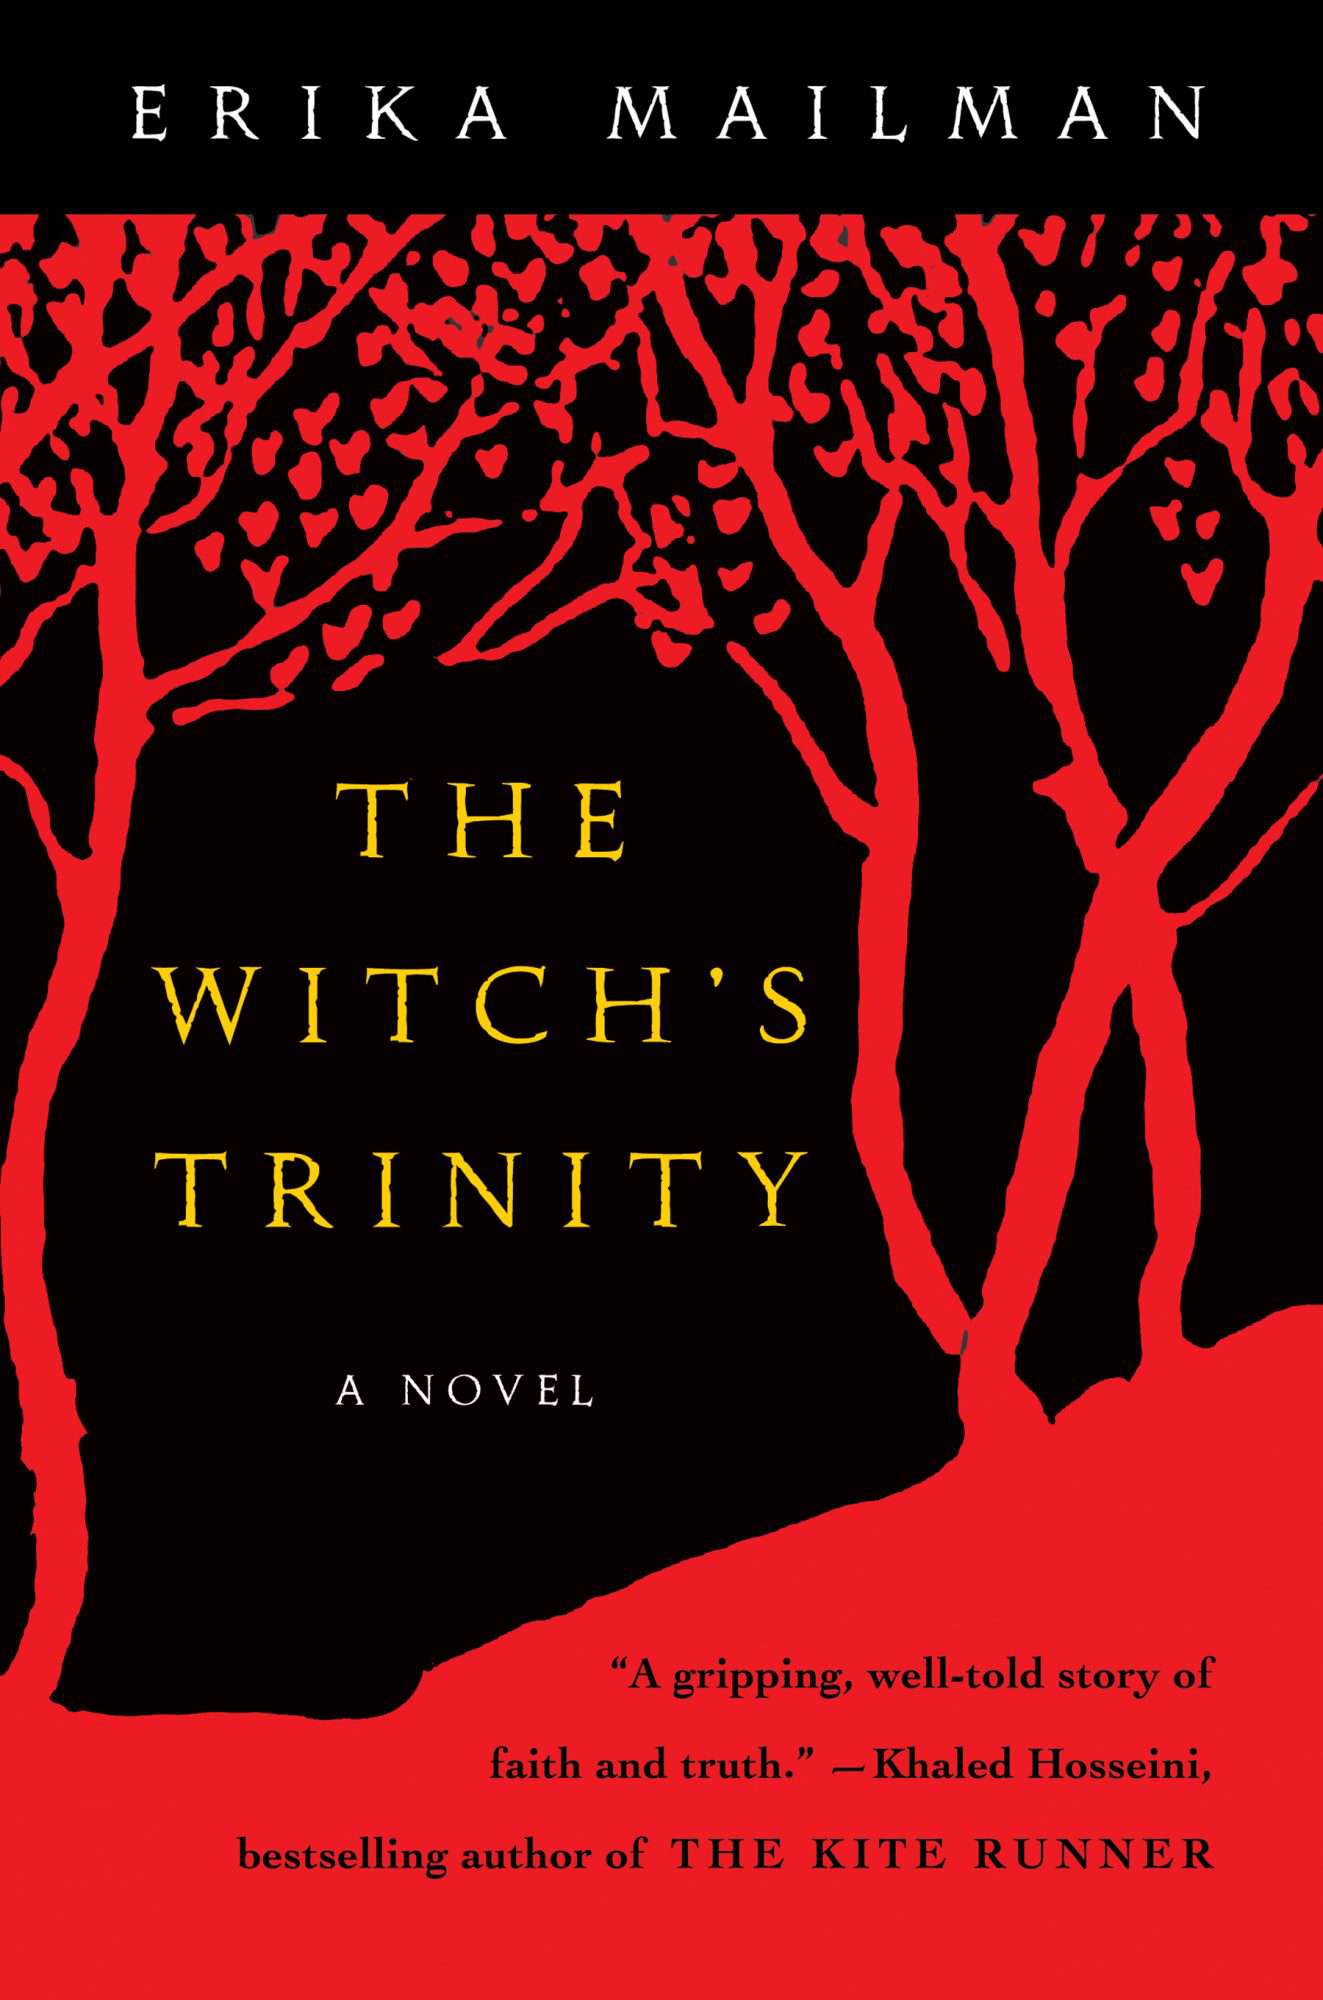 The Witch's Trinity&nbsp;by Erika Mailman